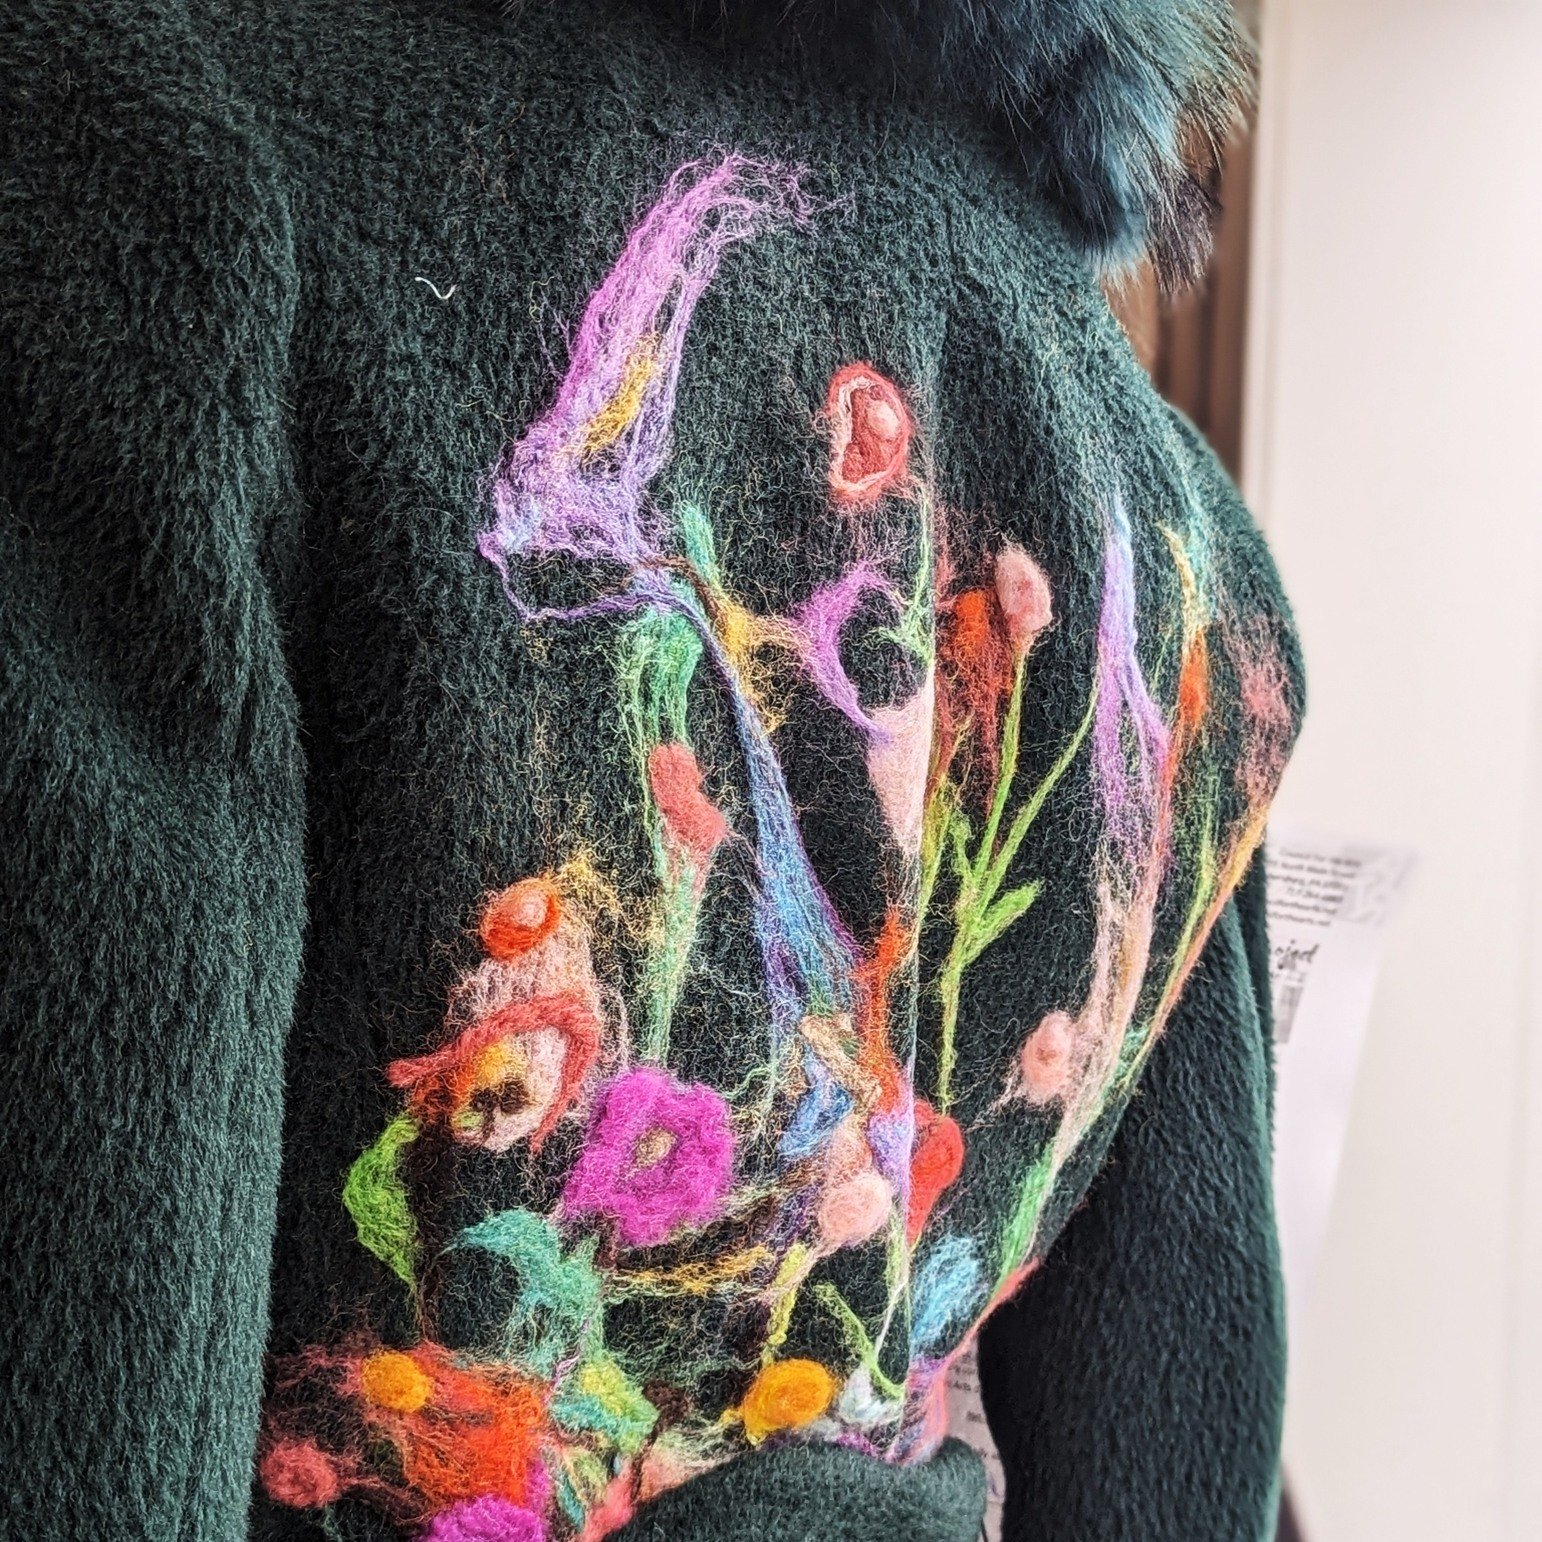 Colorful felted wool creates a magical garden on a green alpaca wool coat with a real fox collar. Coat donated by Nancy Sabiston and transformed by local artist Carolyn Baker, this coat will be available for auction. Or buy now! Come by to see where 